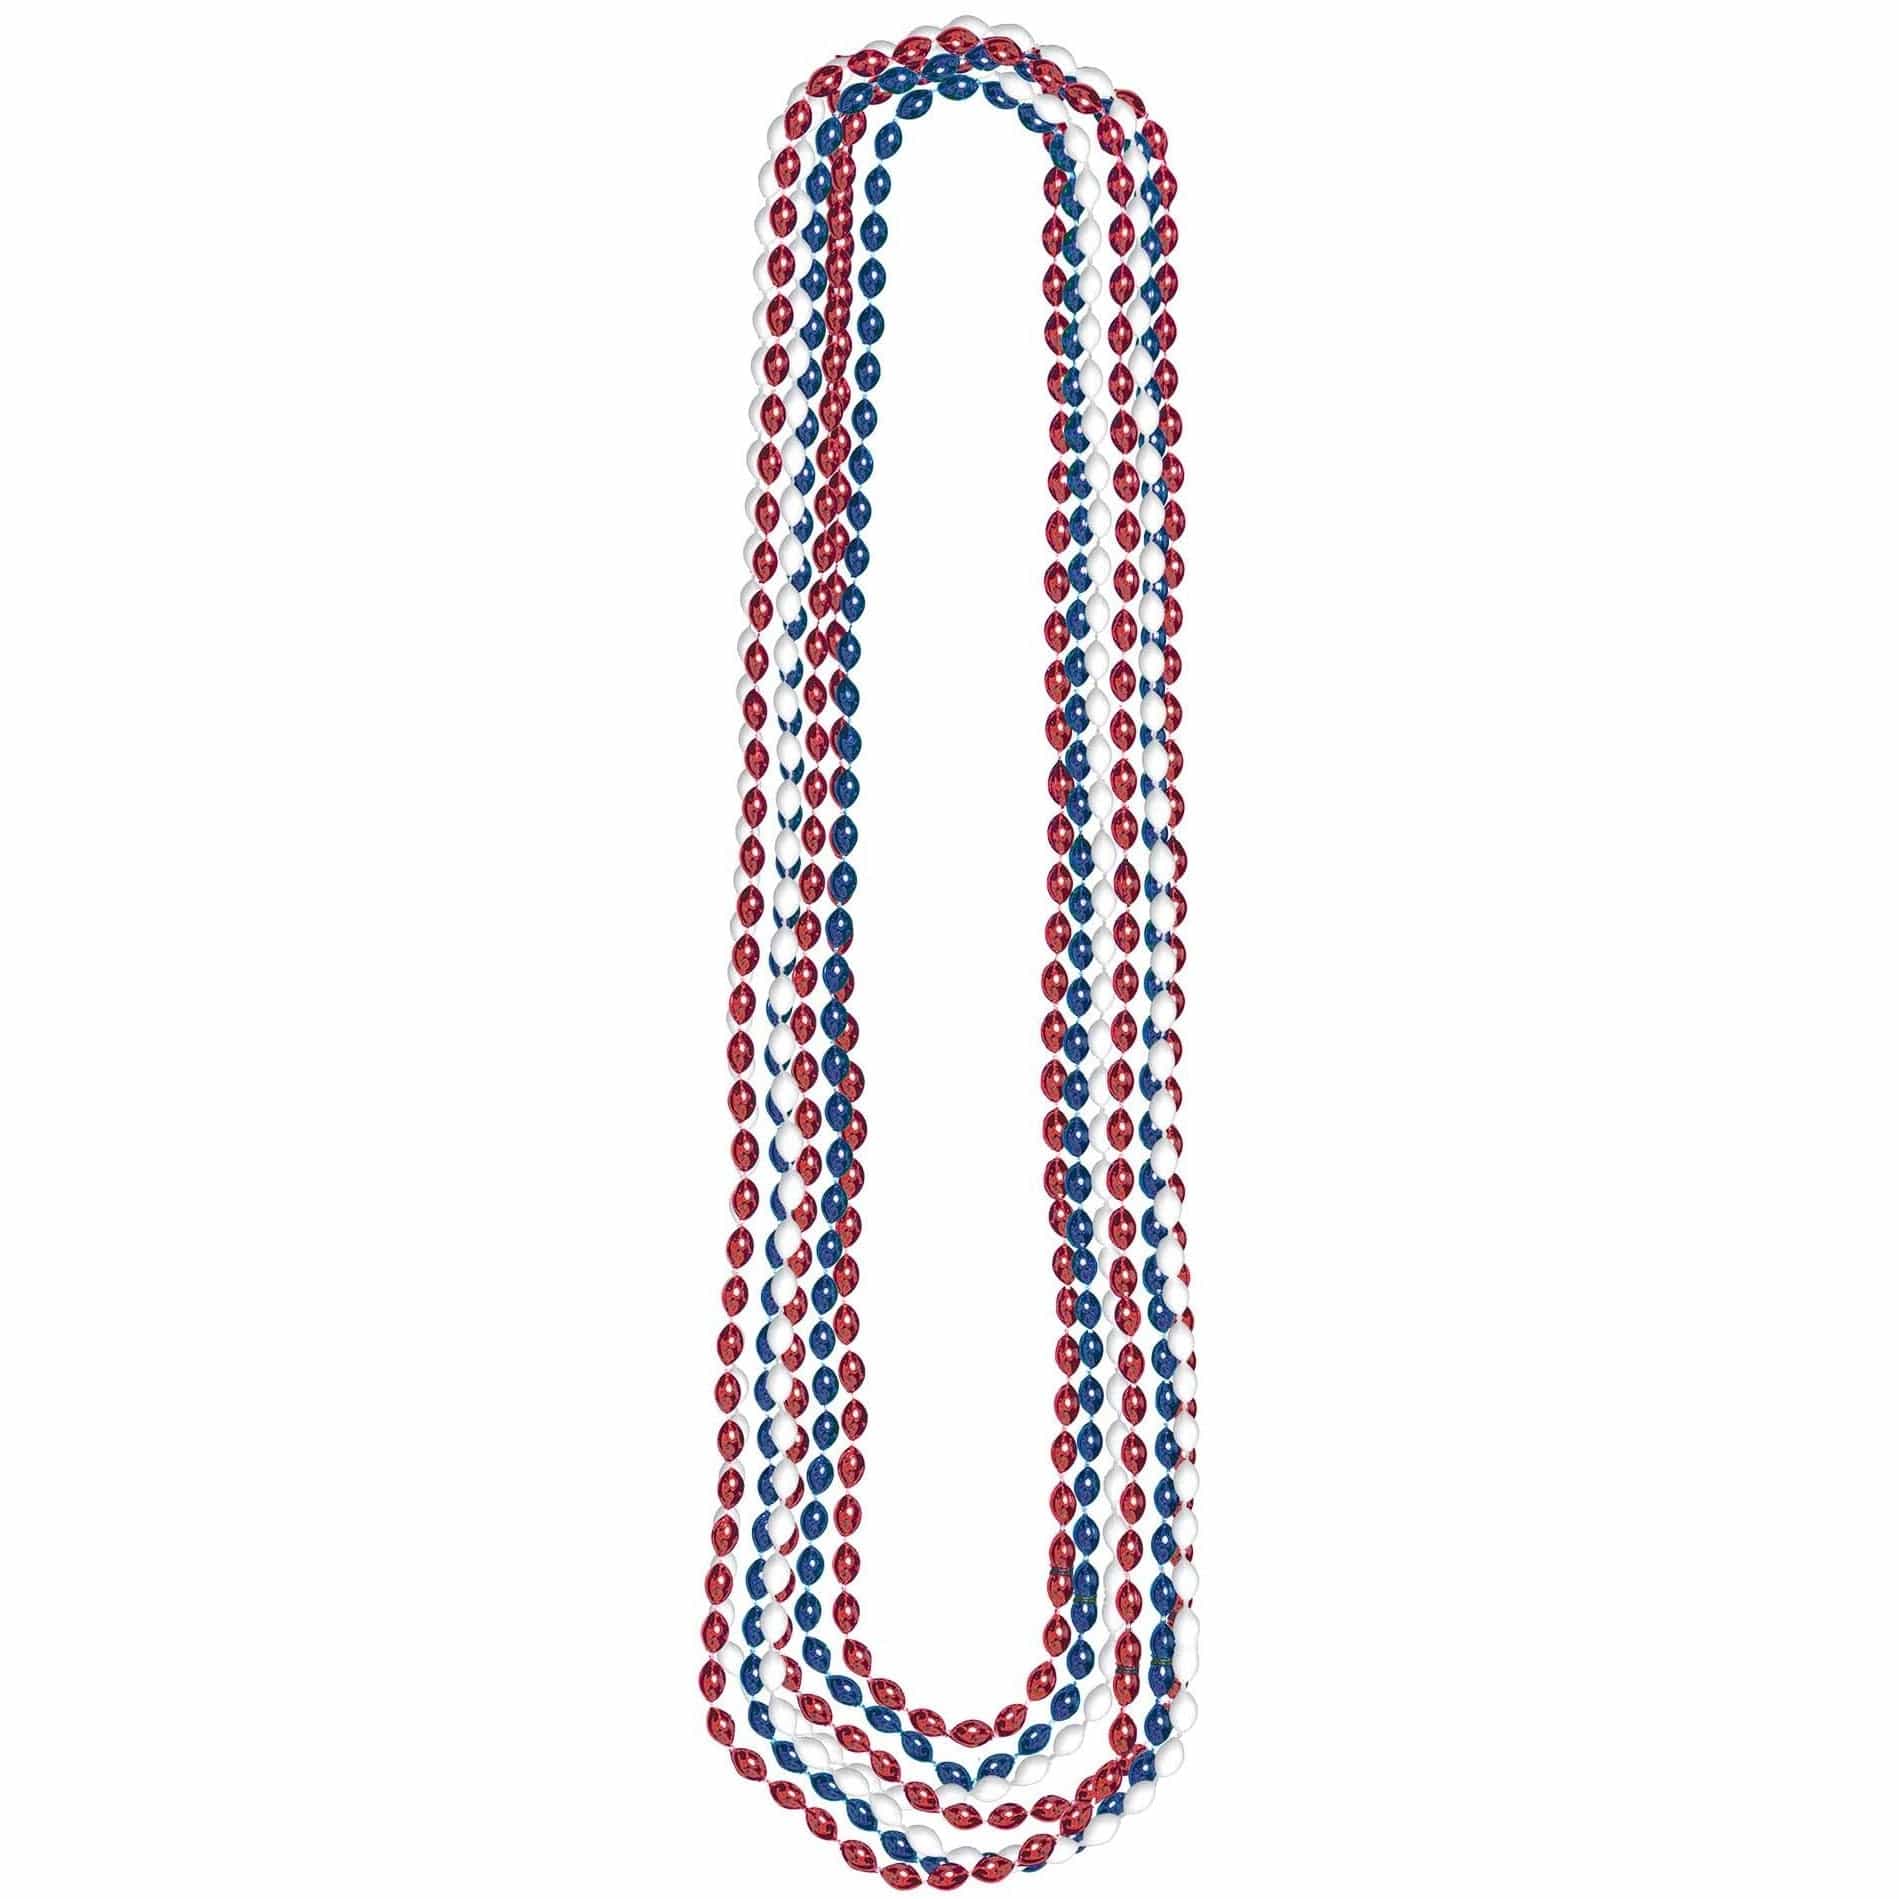 Amscan HOLIDAY: PATRIOTIC Red, White And Blue Necklaces